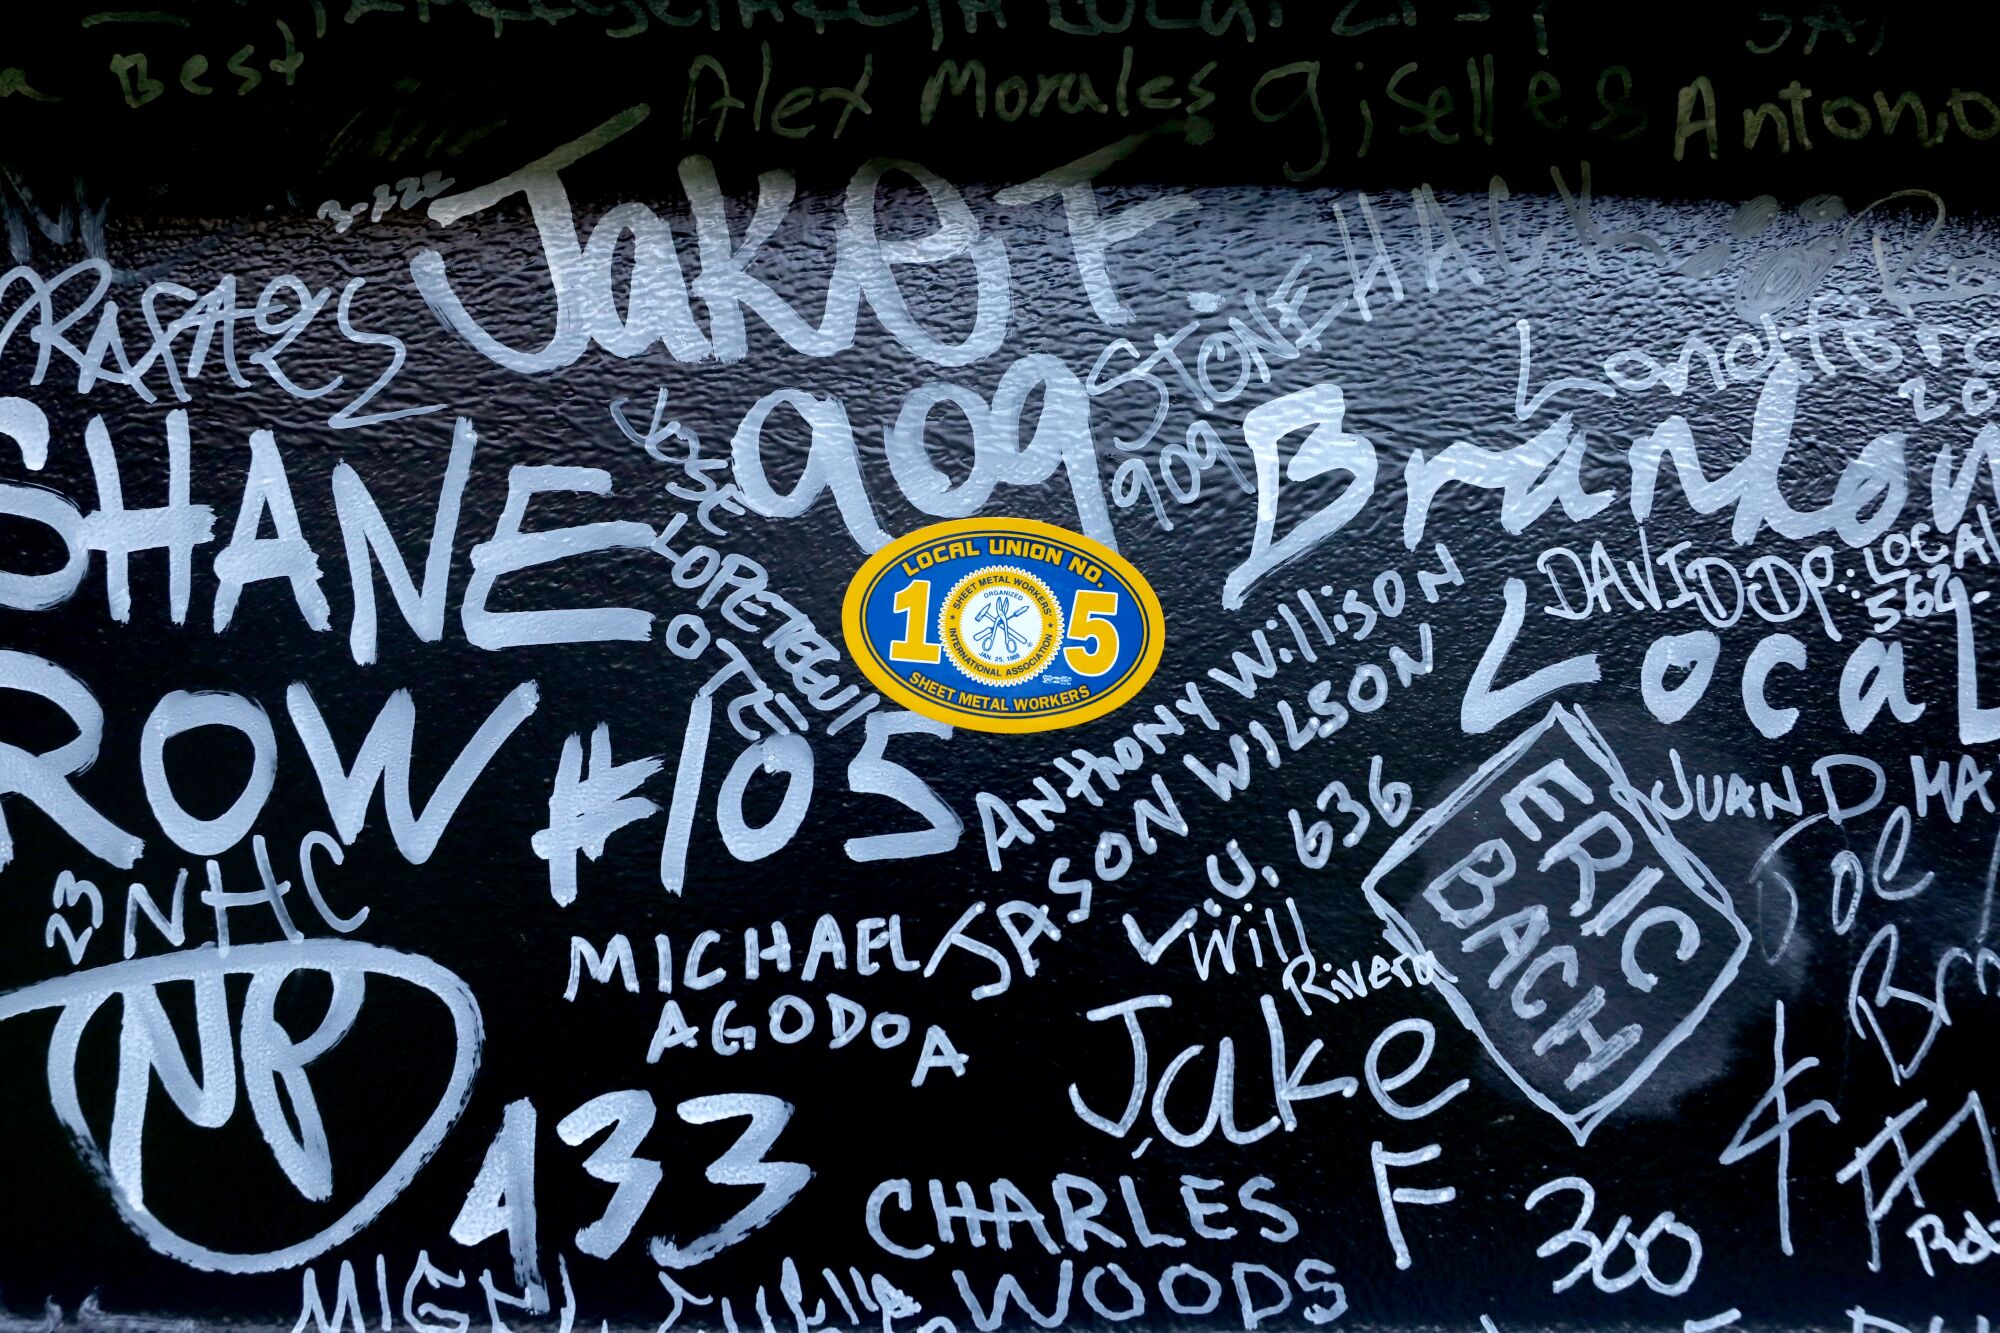 A close-up view of the signatures on a steel beam placed atop the Intuit Dome.